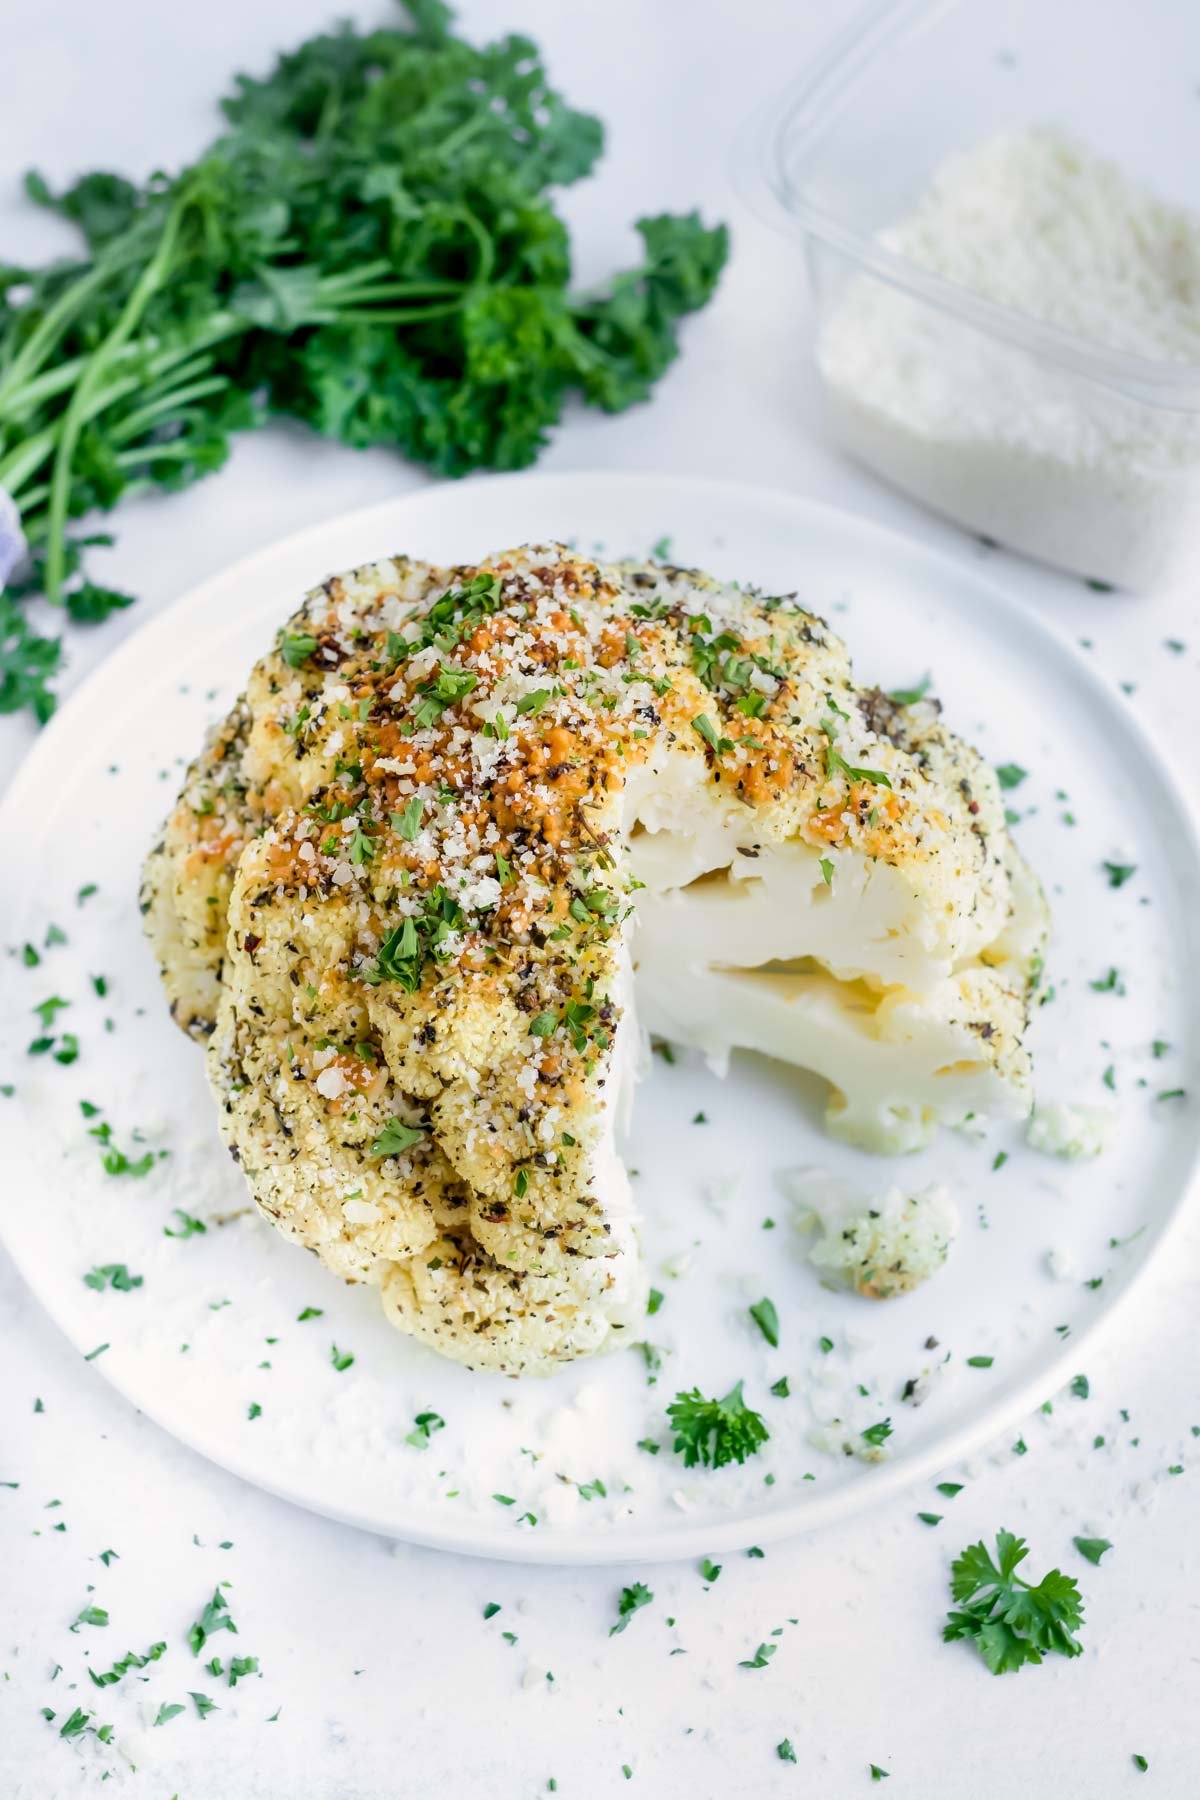 A gluten-free and low-carb roasted cauliflower head on a white plate.